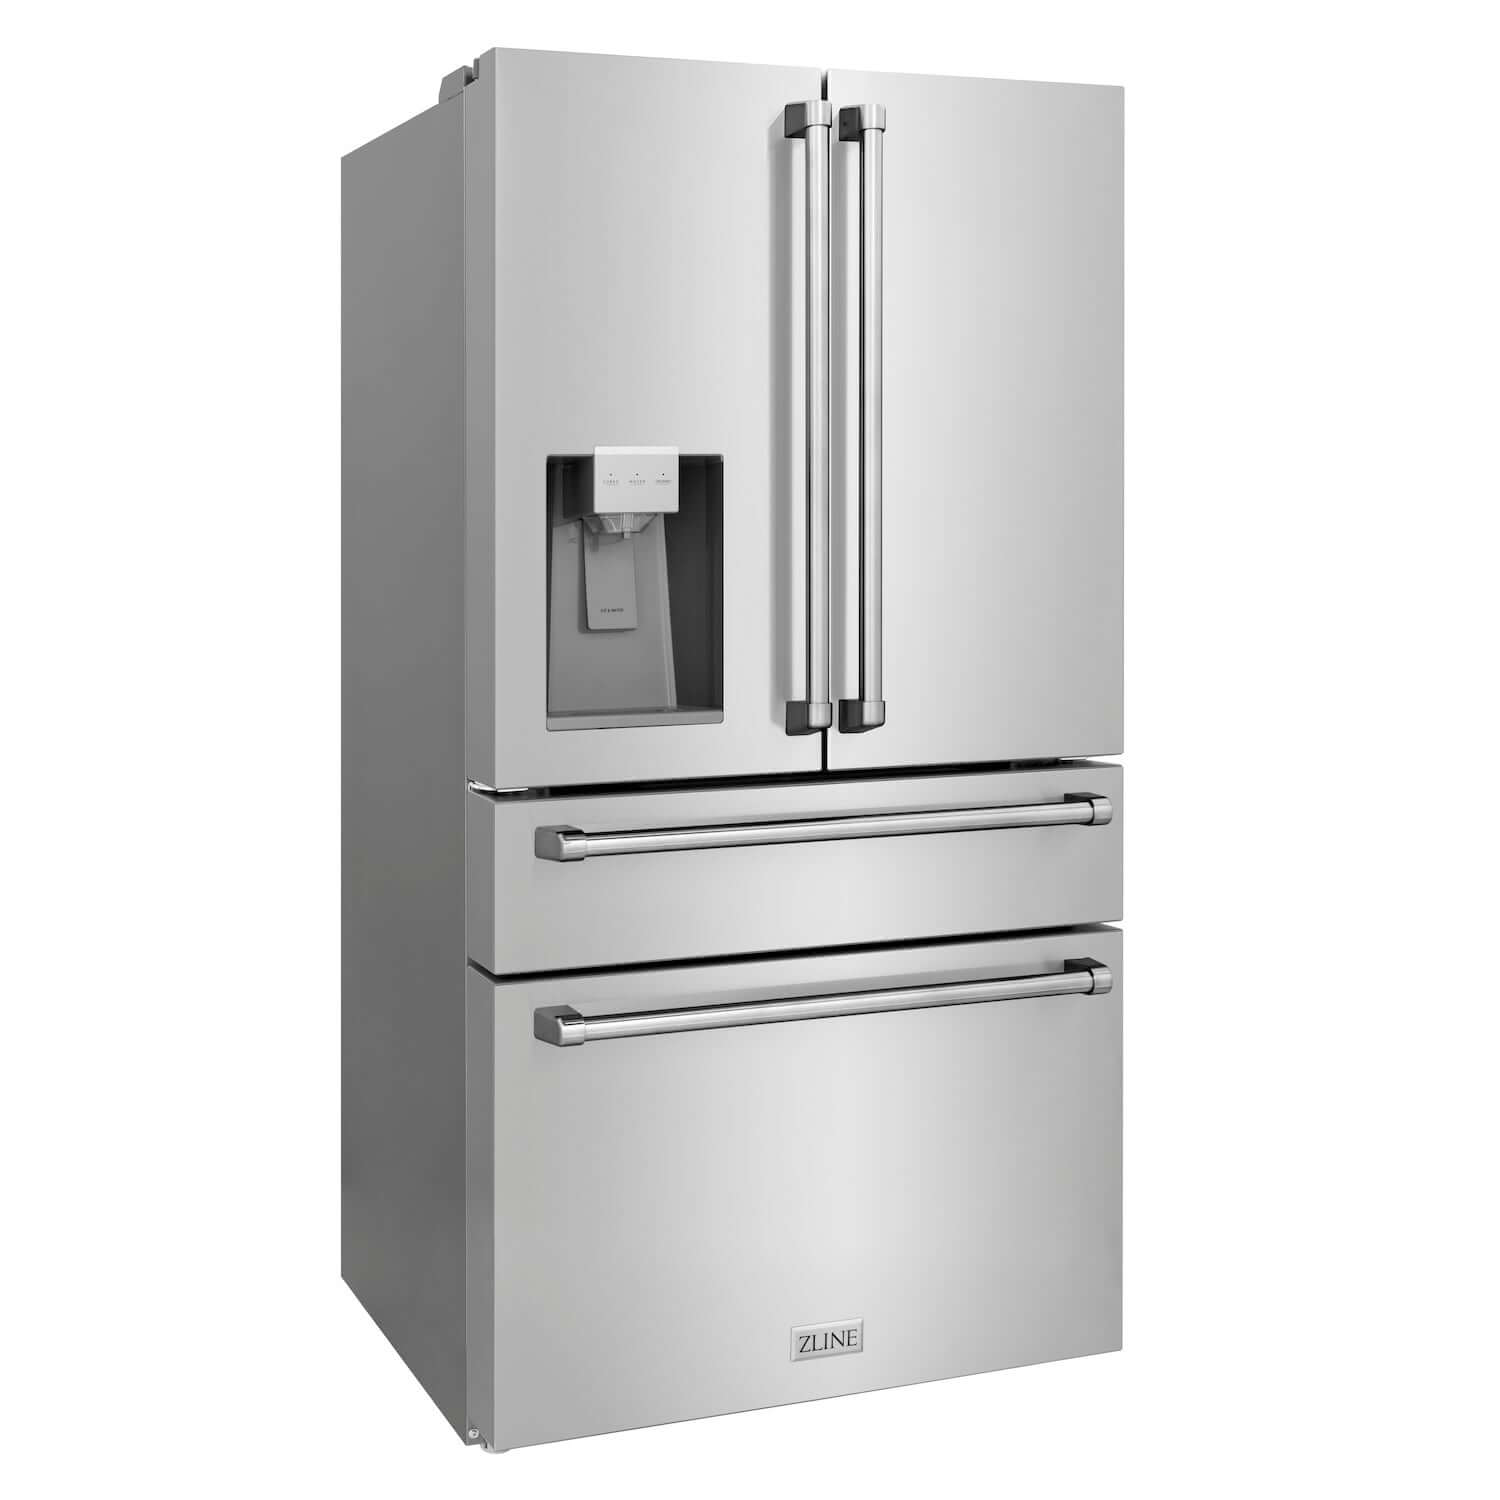 ZLINE 36" French door counter-depth refrigerator with water and ice dispenser side view.